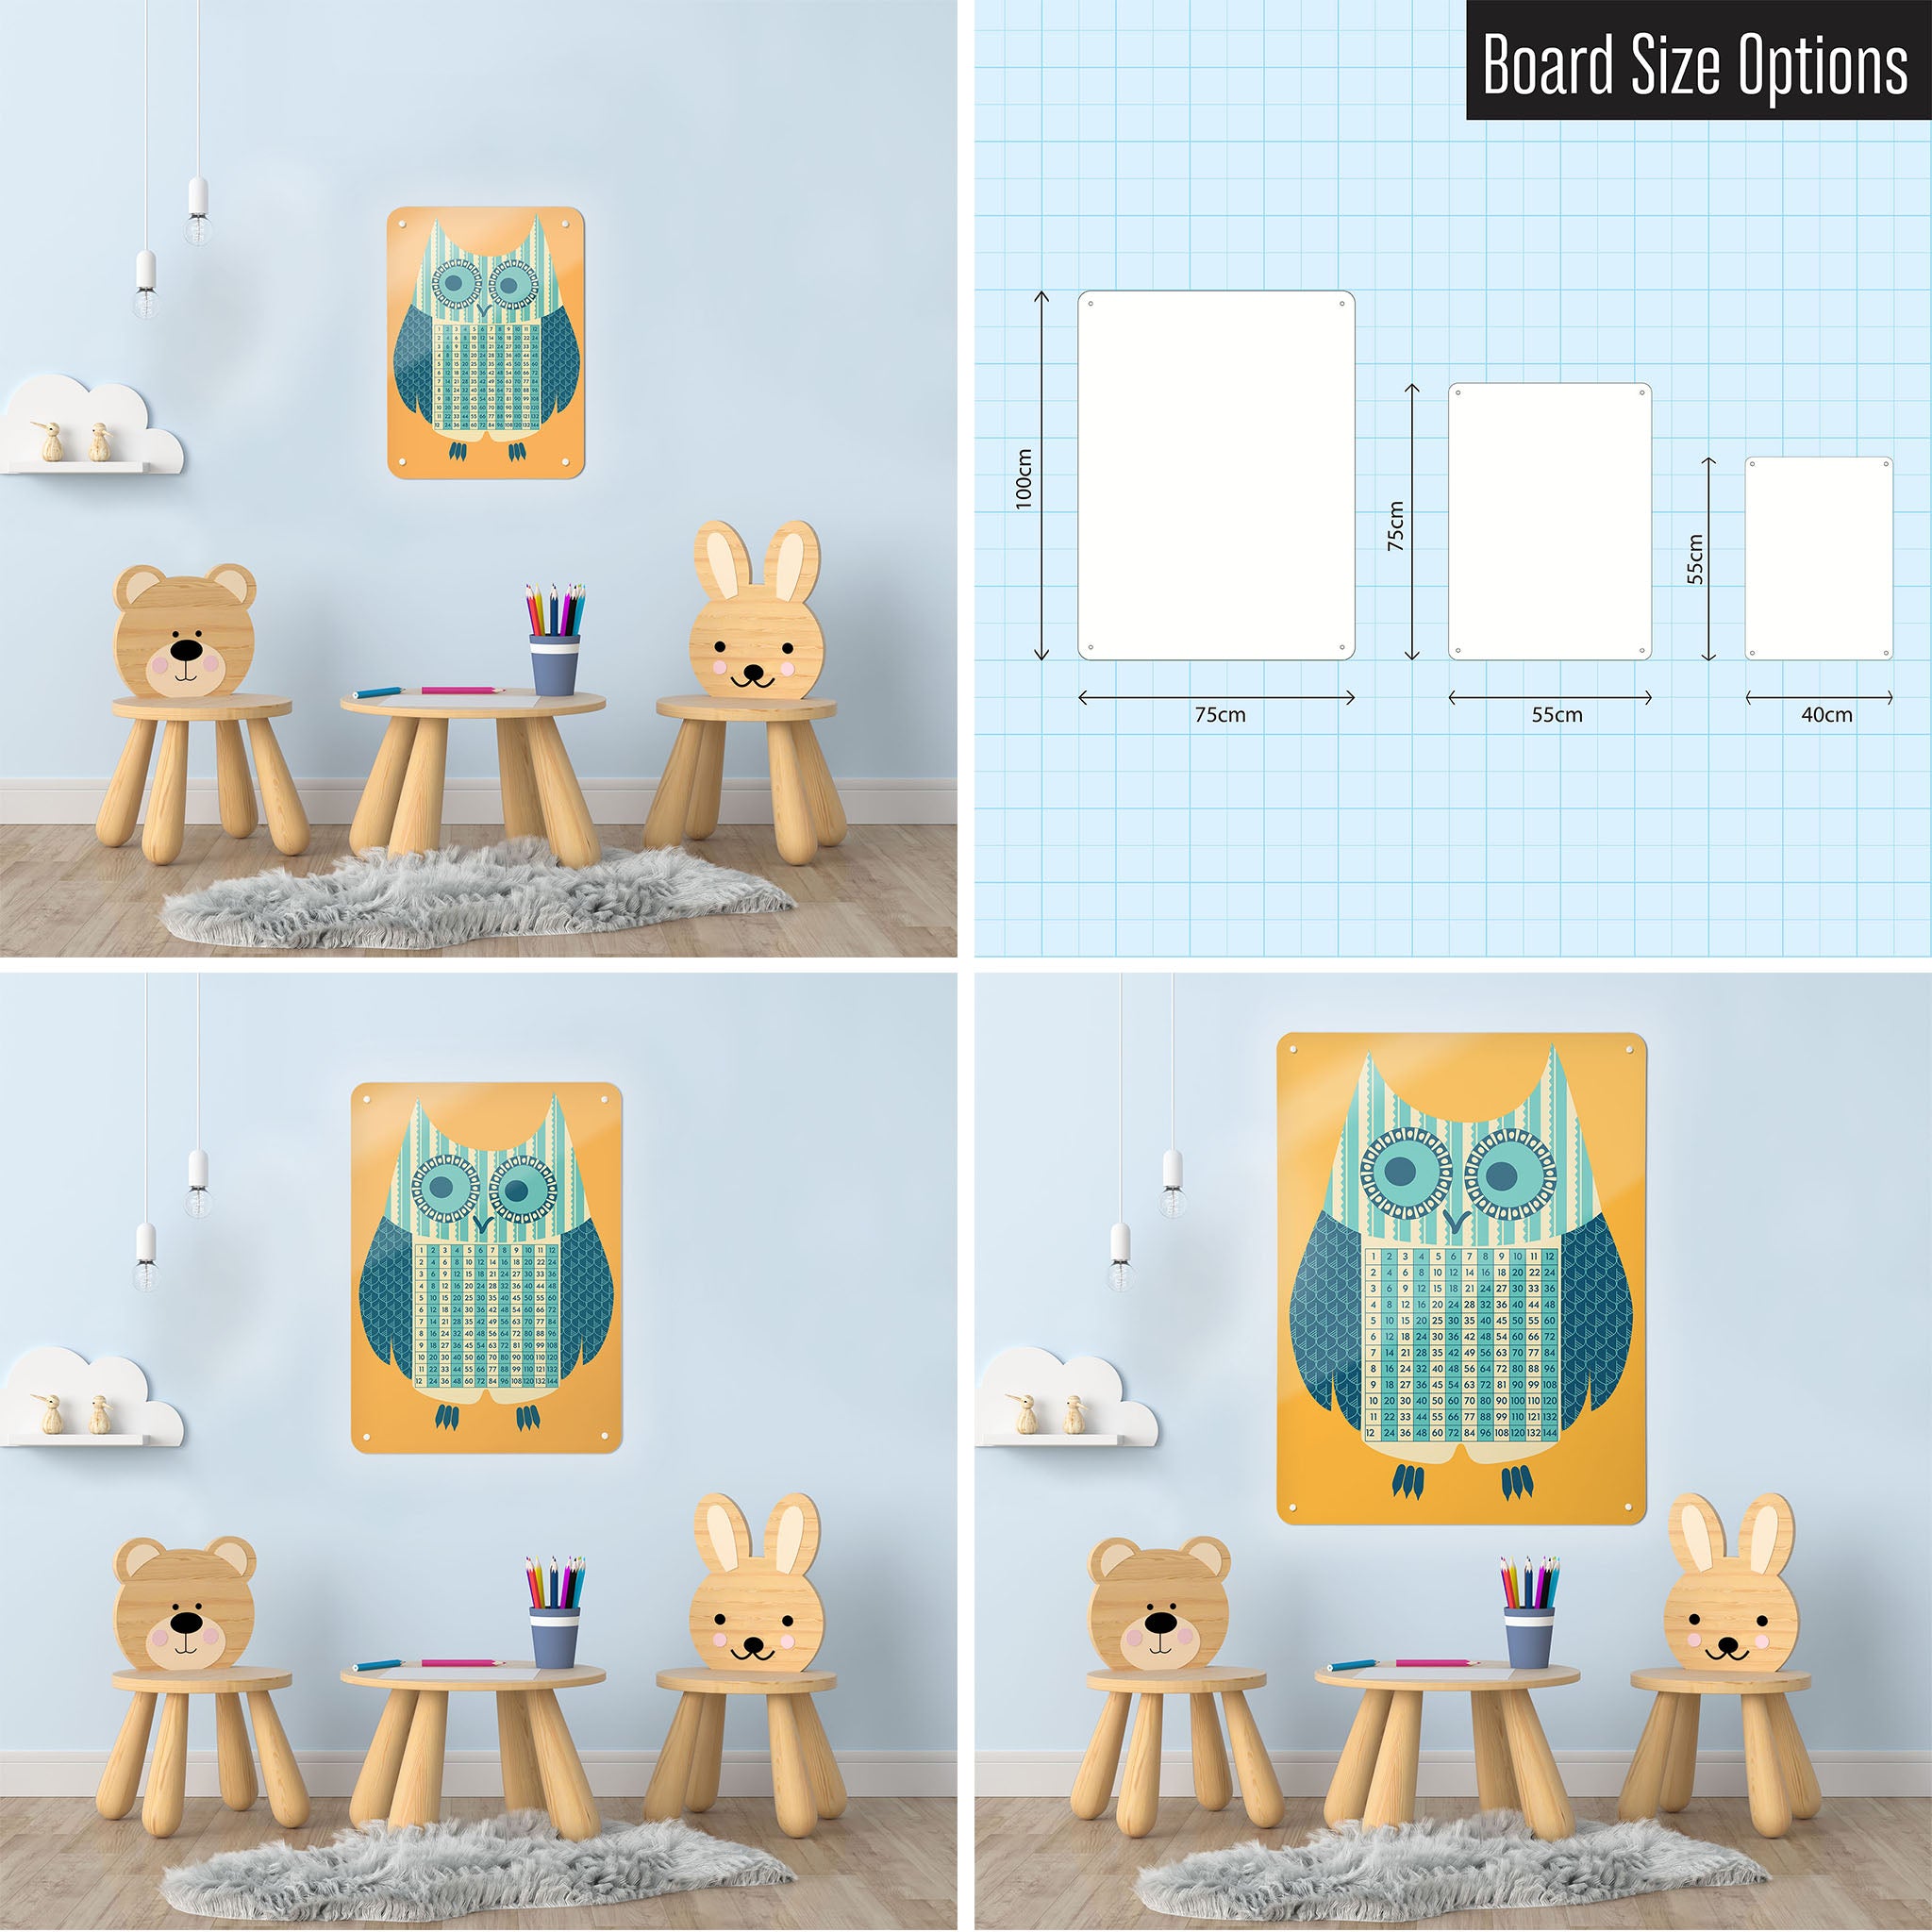 Three photographs of a workspace interior and a diagram to show size comparisons of a wise owl times tables design magnetic notice board